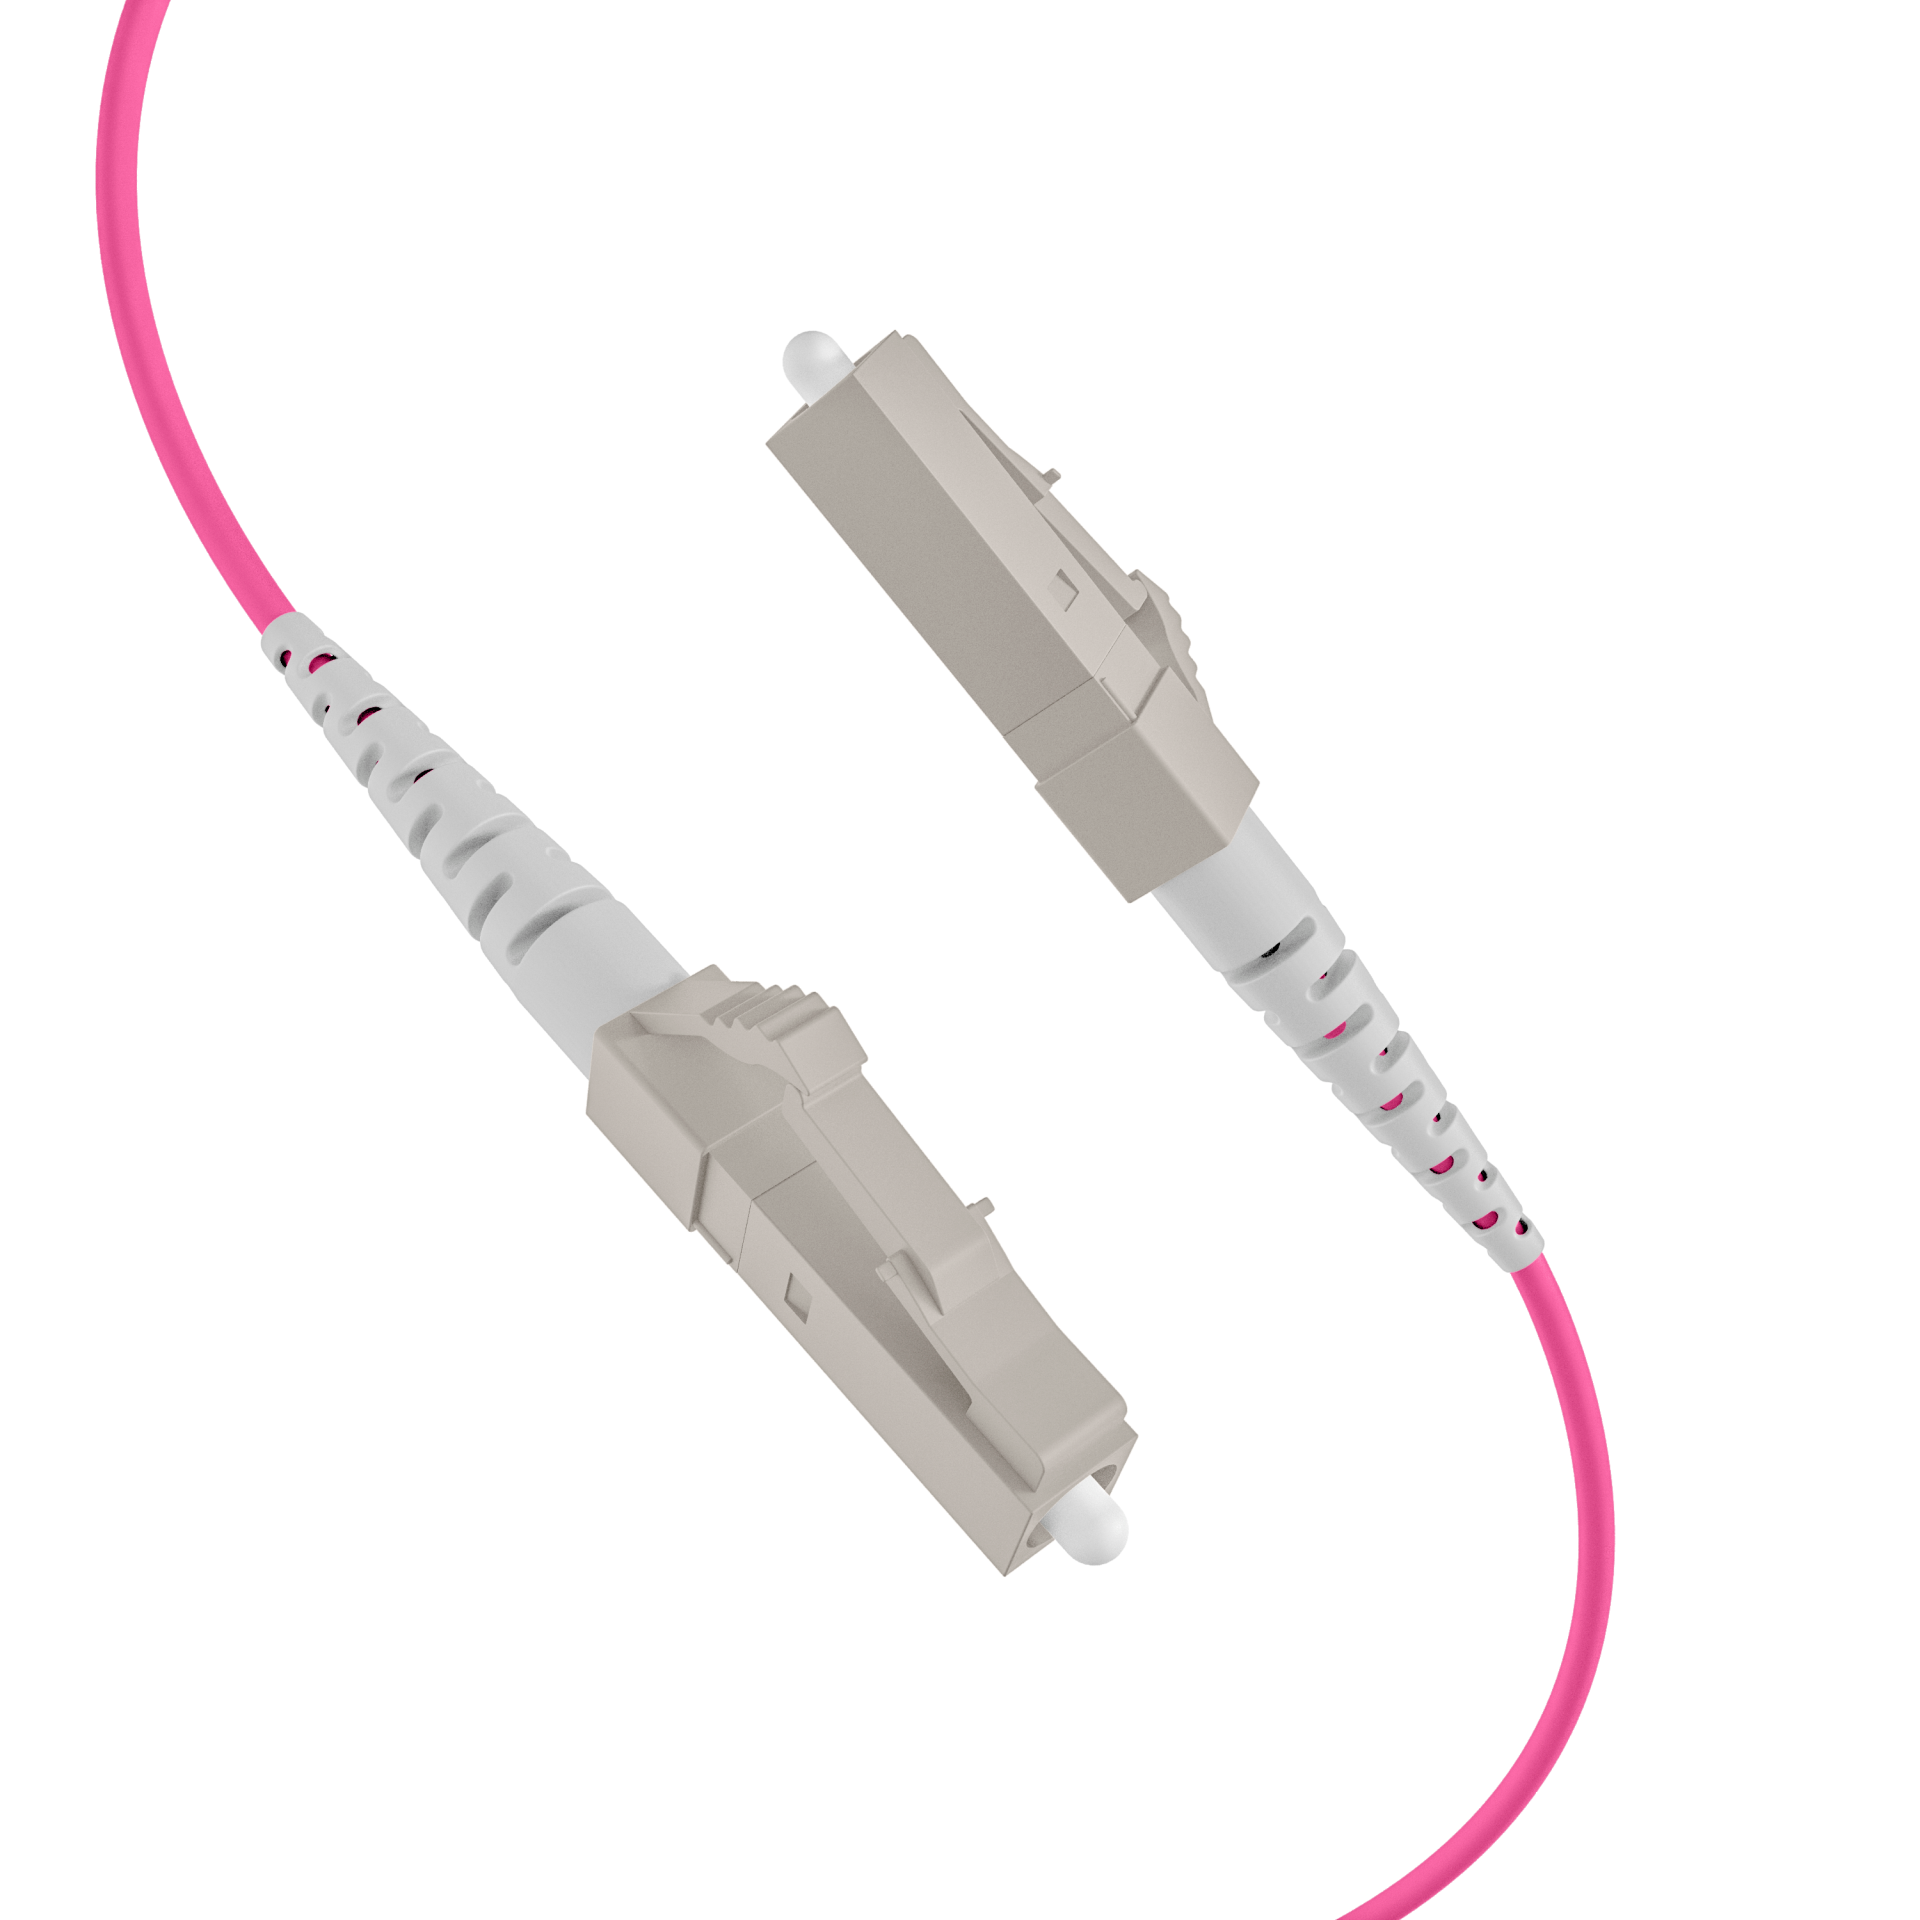 Trunkcable U-DQ(ZN)BH OM4 8G (1x8) LC-LC,130m Dca LSZH